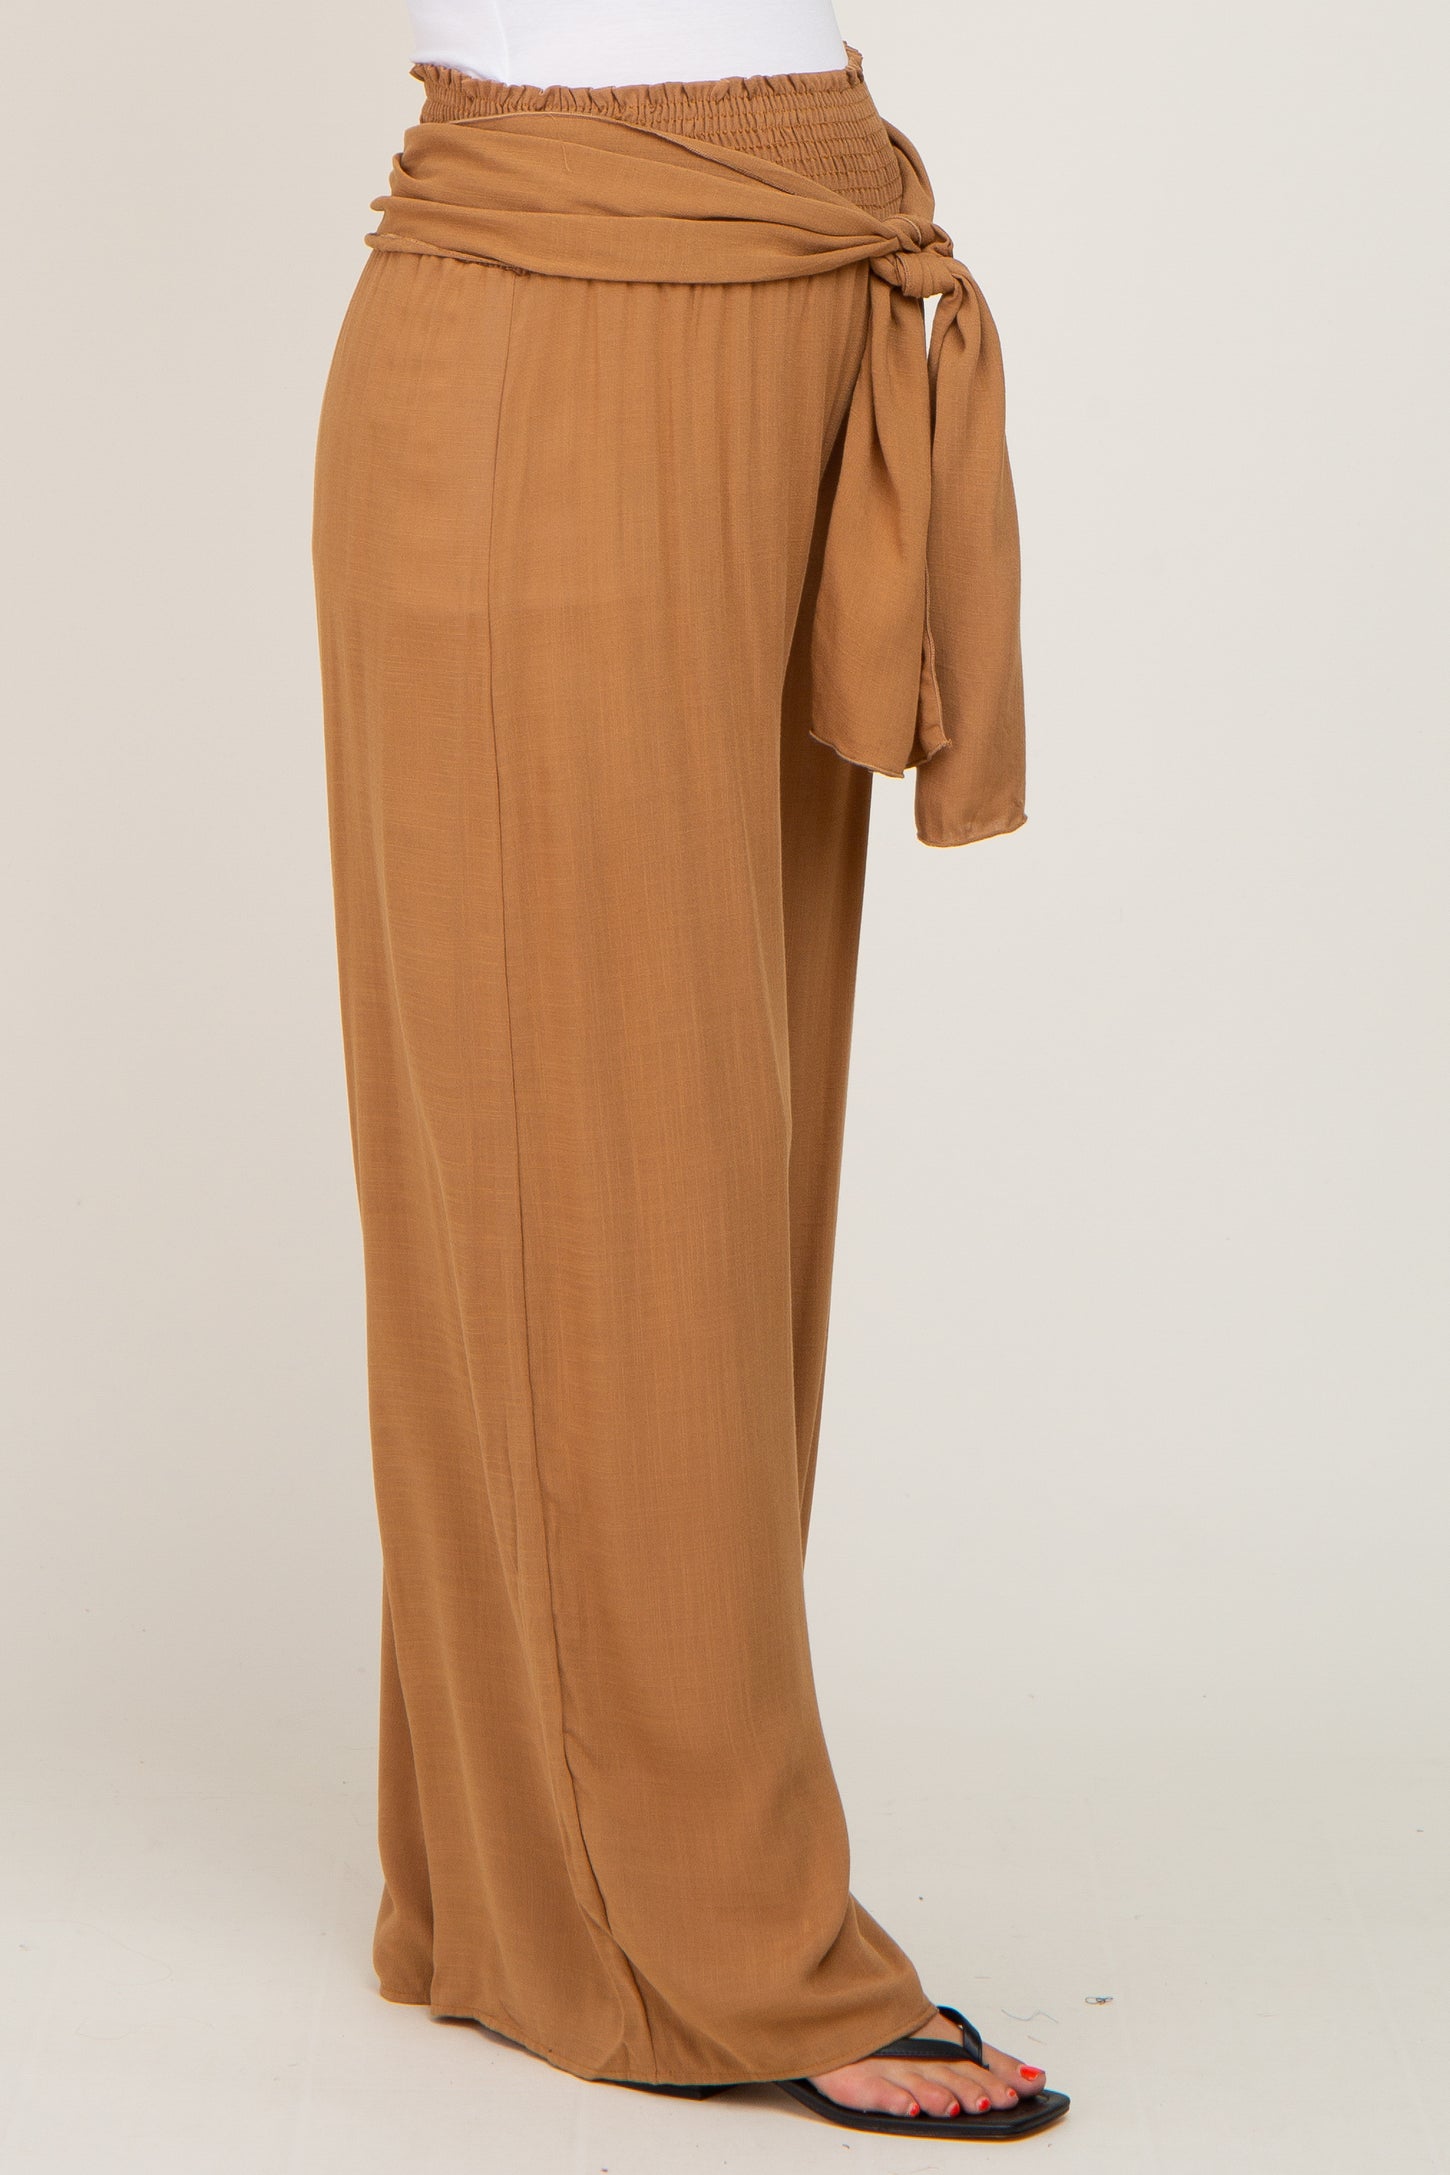 Camel High Waist Tie Front Wide Maternity Pants